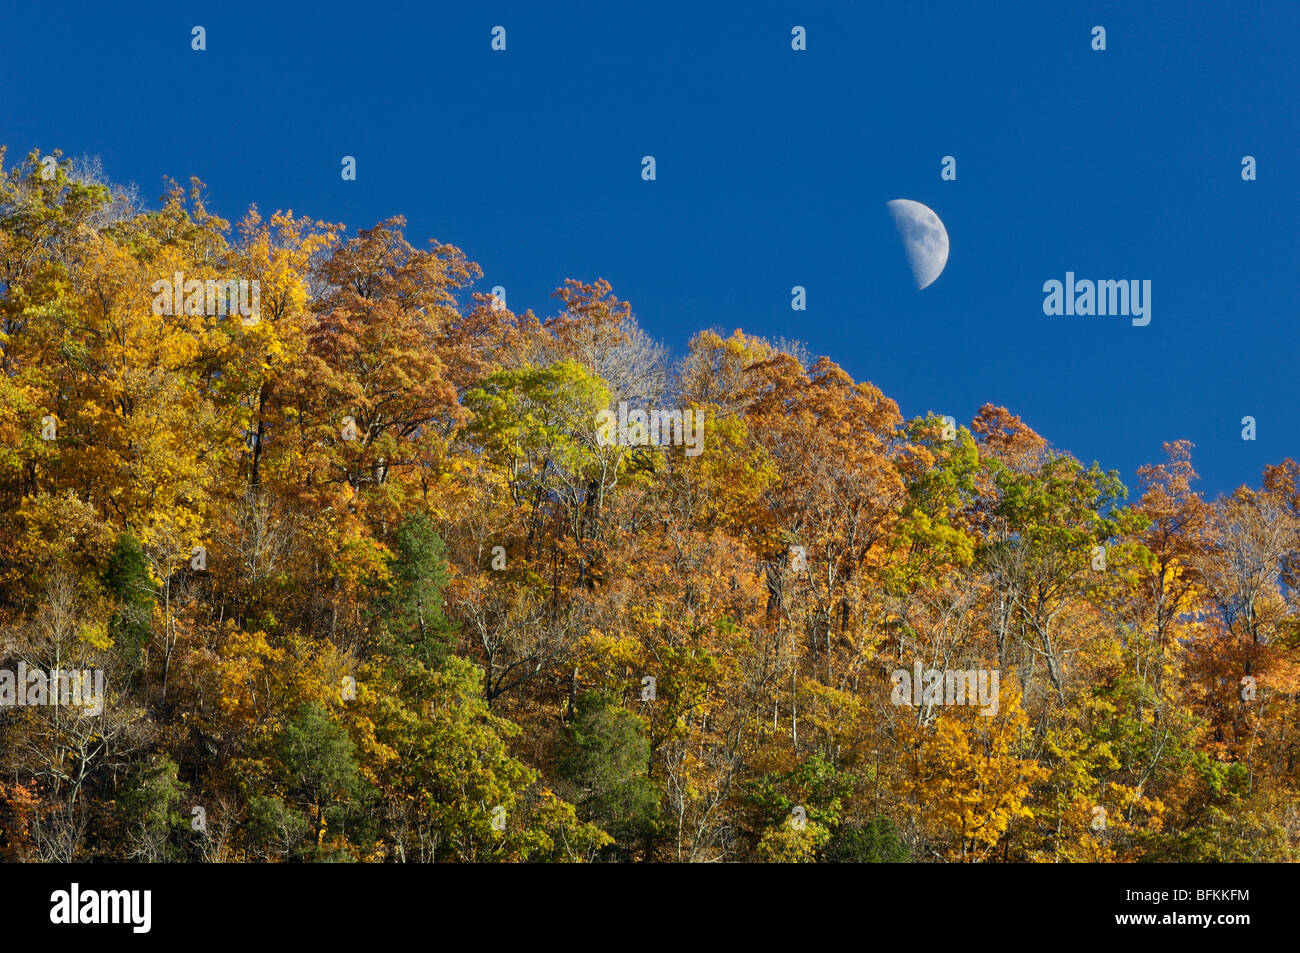 Autumn Color on Pine Mountain with First Quarter Moon against Blue Sky in Letcher County, Kentucky Stock Photo